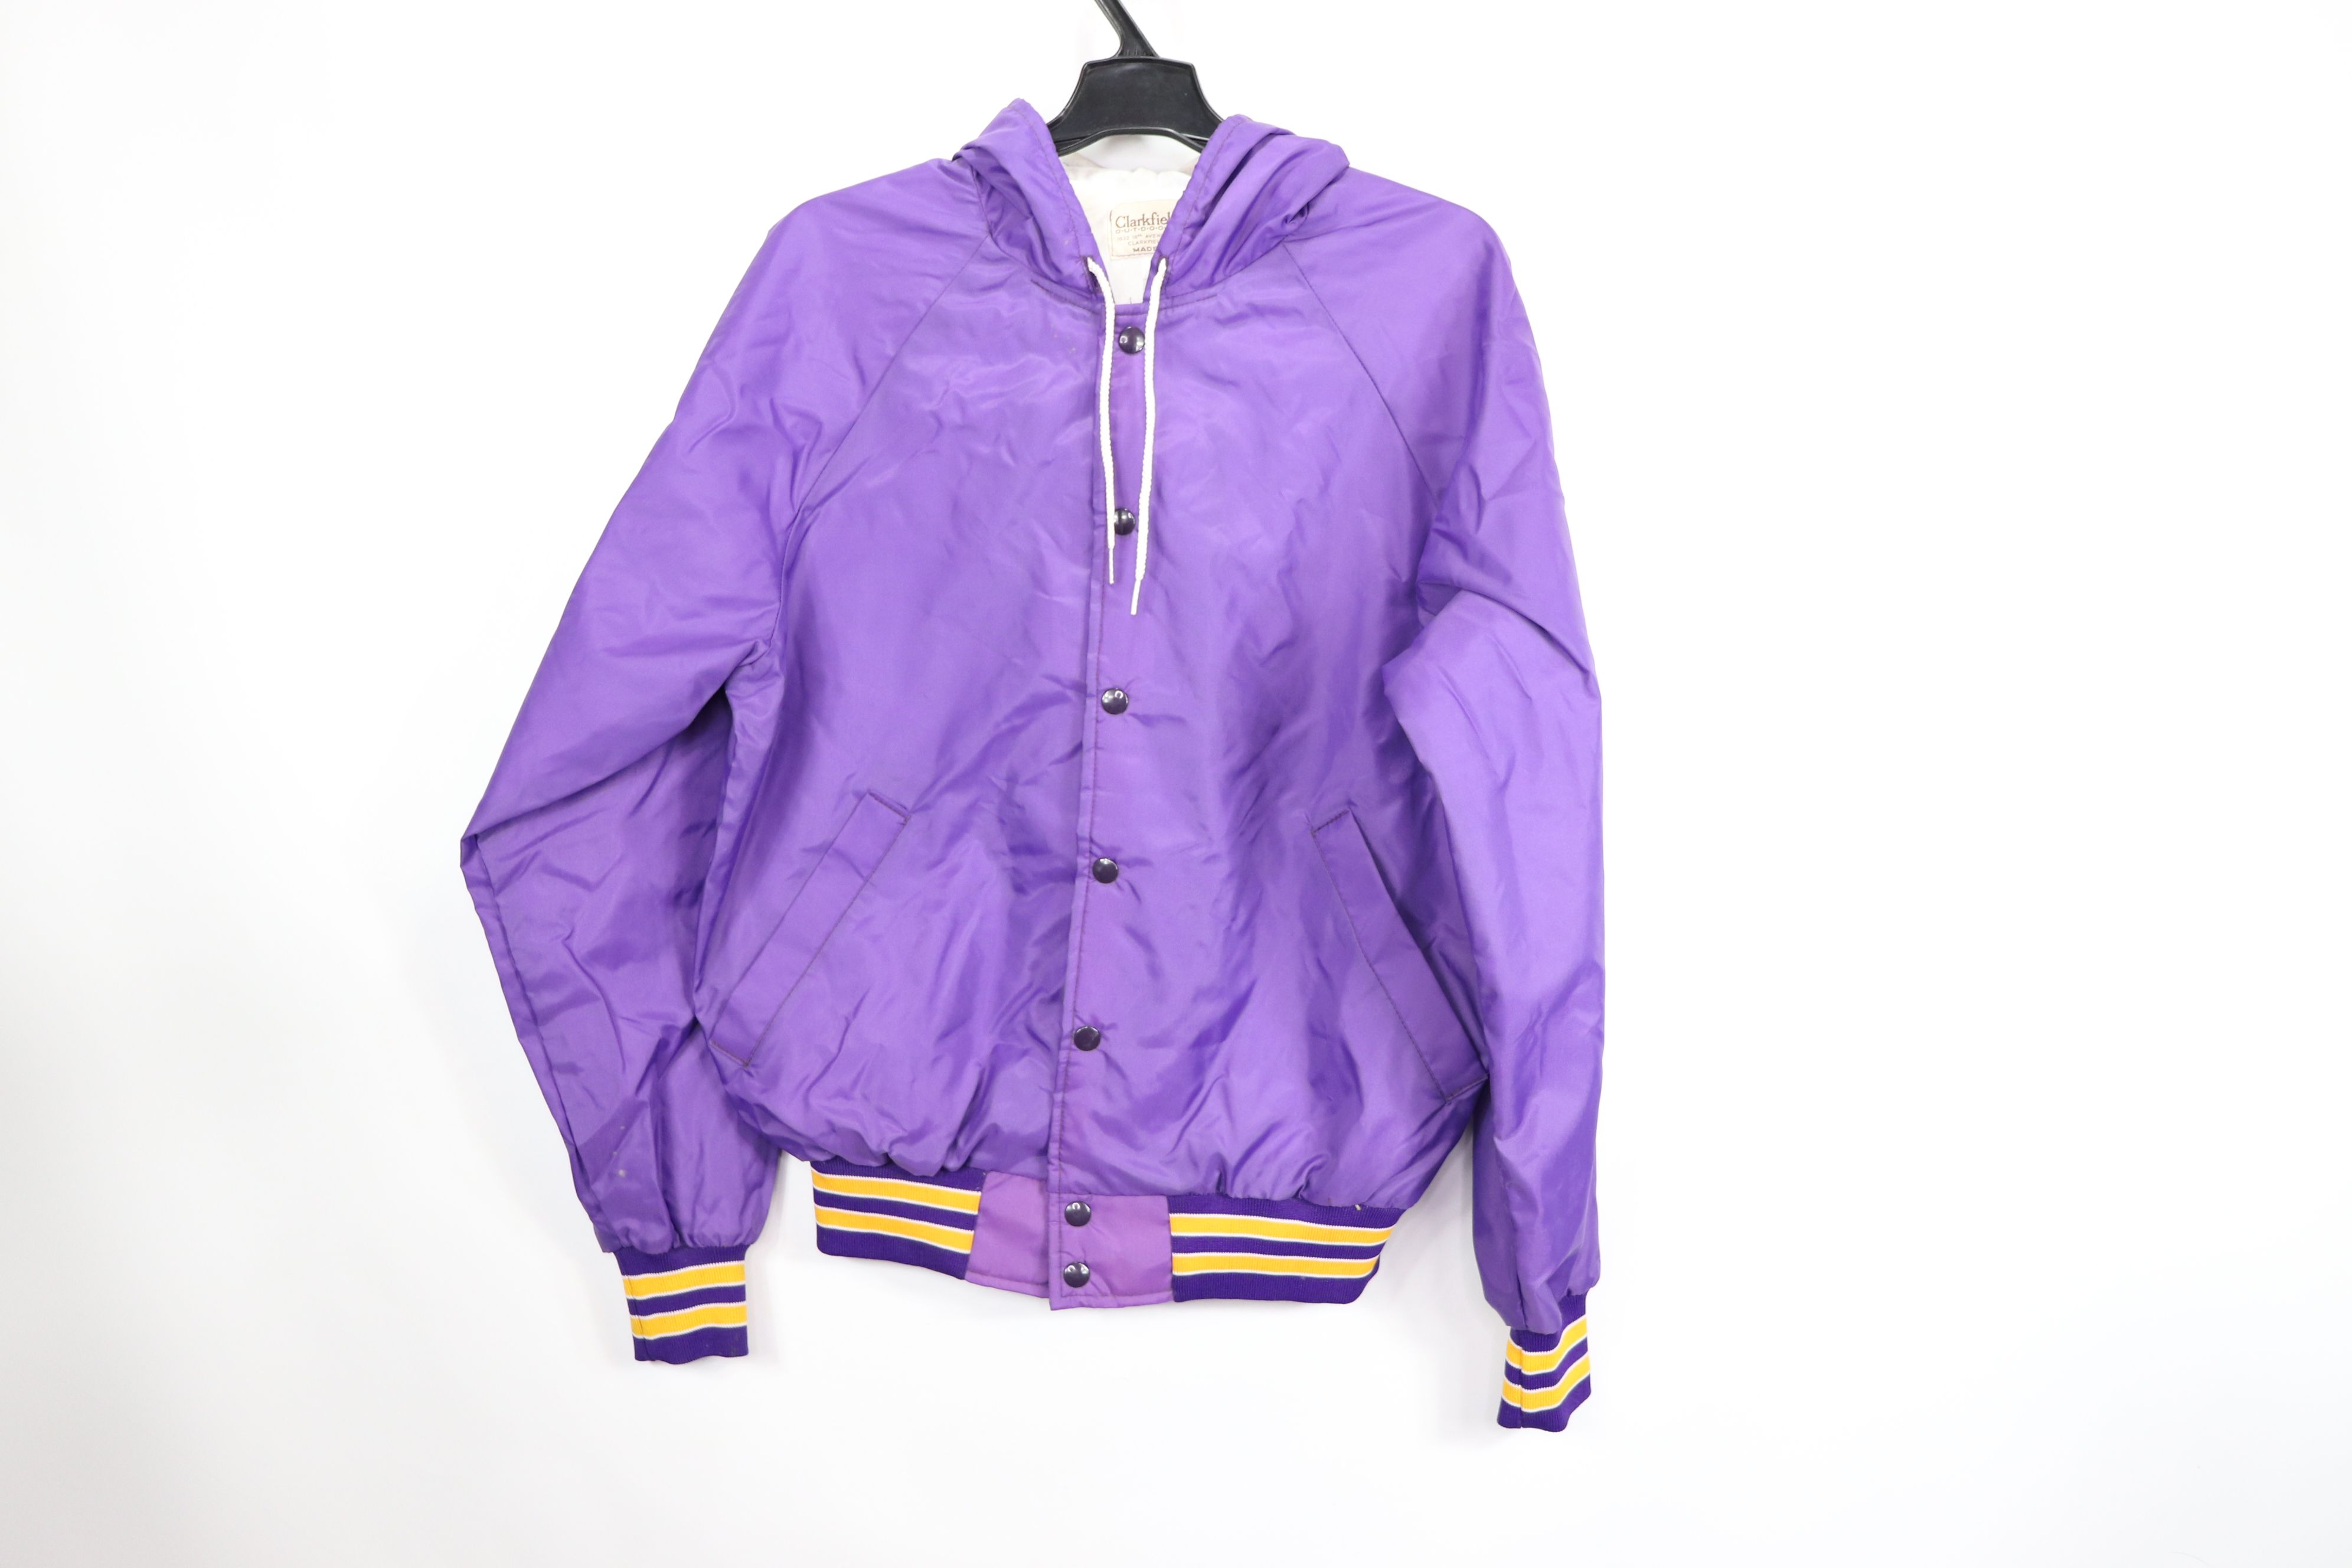 Vintage 80s Clarkfield Mens Medium Button Front Lined Hooded Varsity Jacket Purple Size US M / EU 48-50 / 2 - 1 Preview